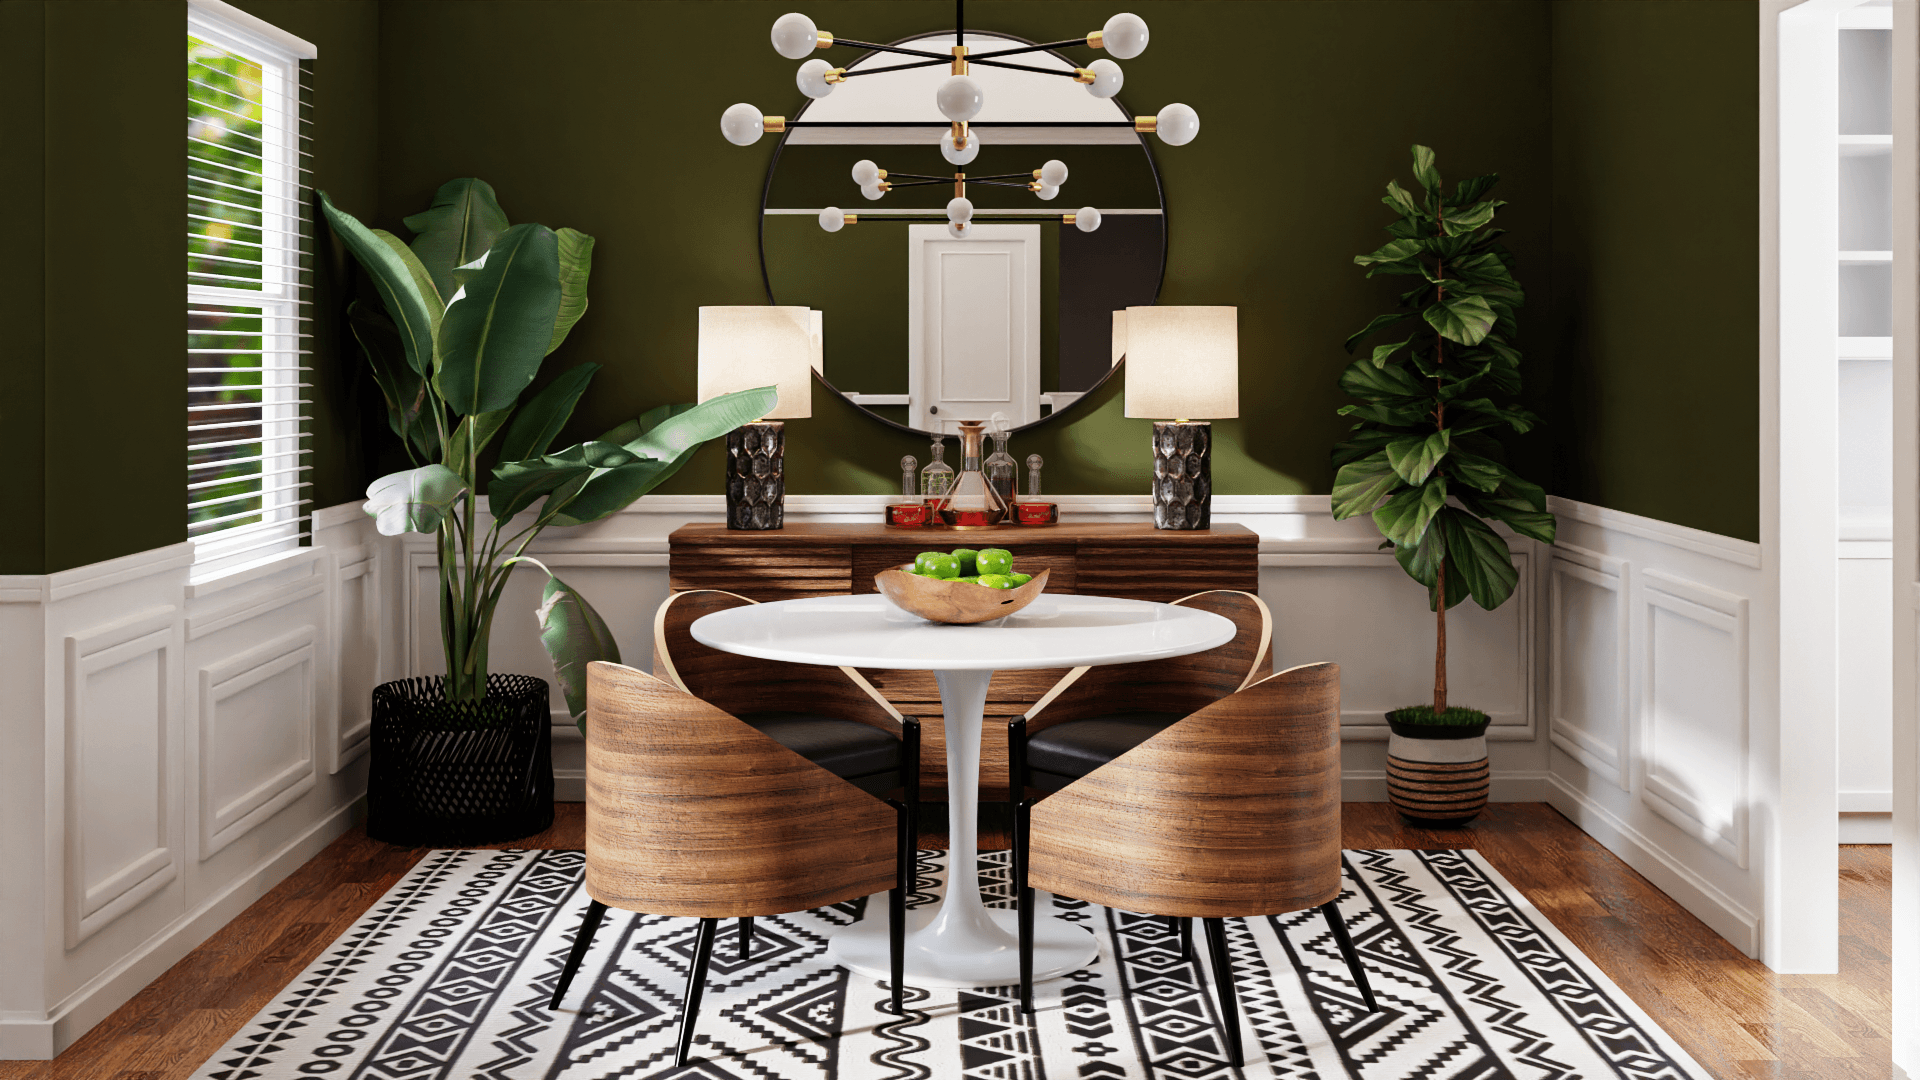 A Modern Dining Room In Forest Green Tones